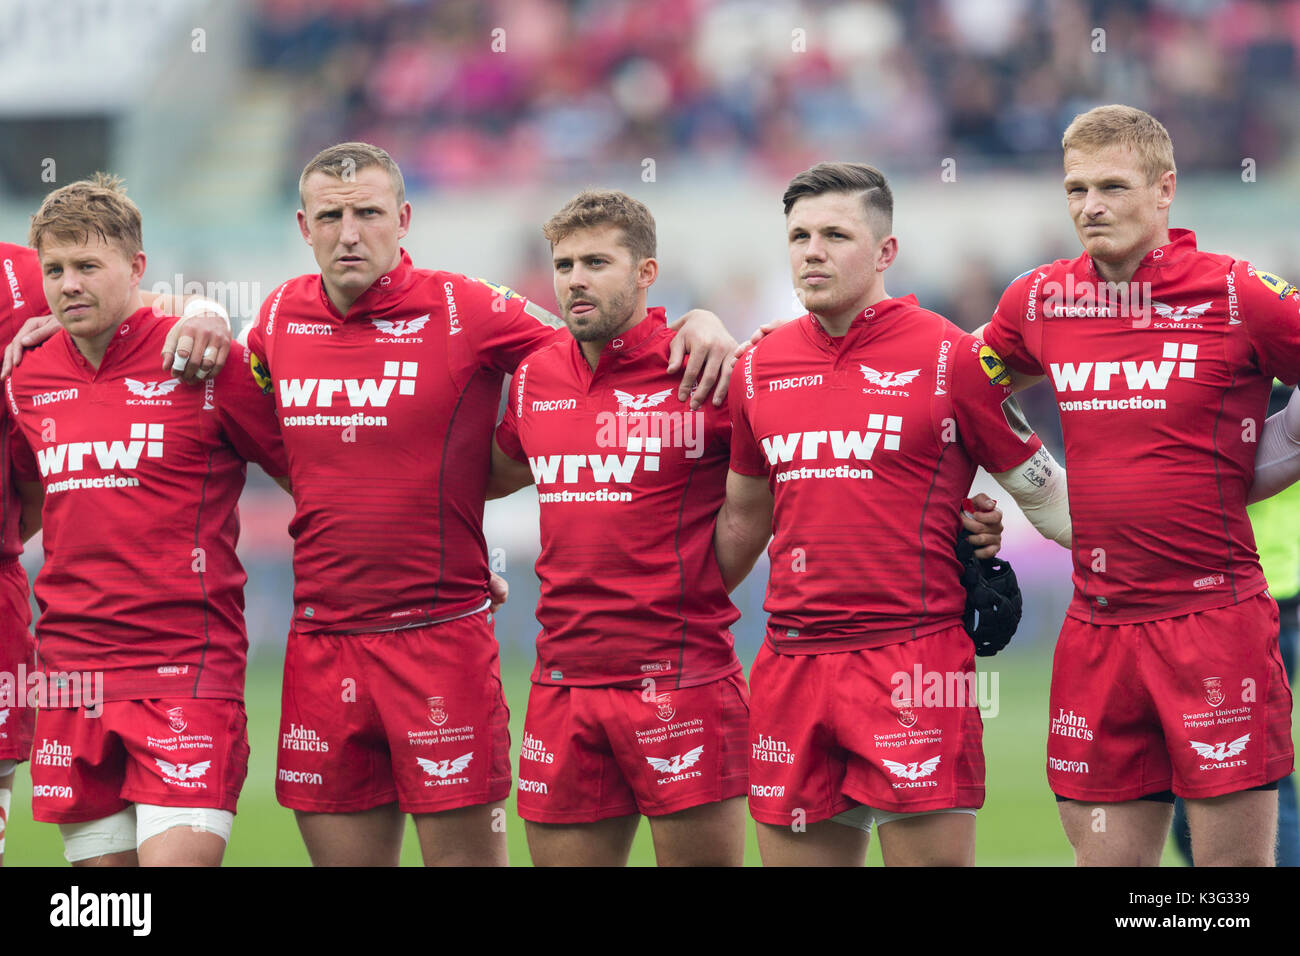 Scarlets players (L to R) James Davies, Hadleigh Parkes, Leigh Halfpenny, Steffan Evans and Johnny McNicholl before a Pro14 rugby match at Parc y Scarlets Stock Photo